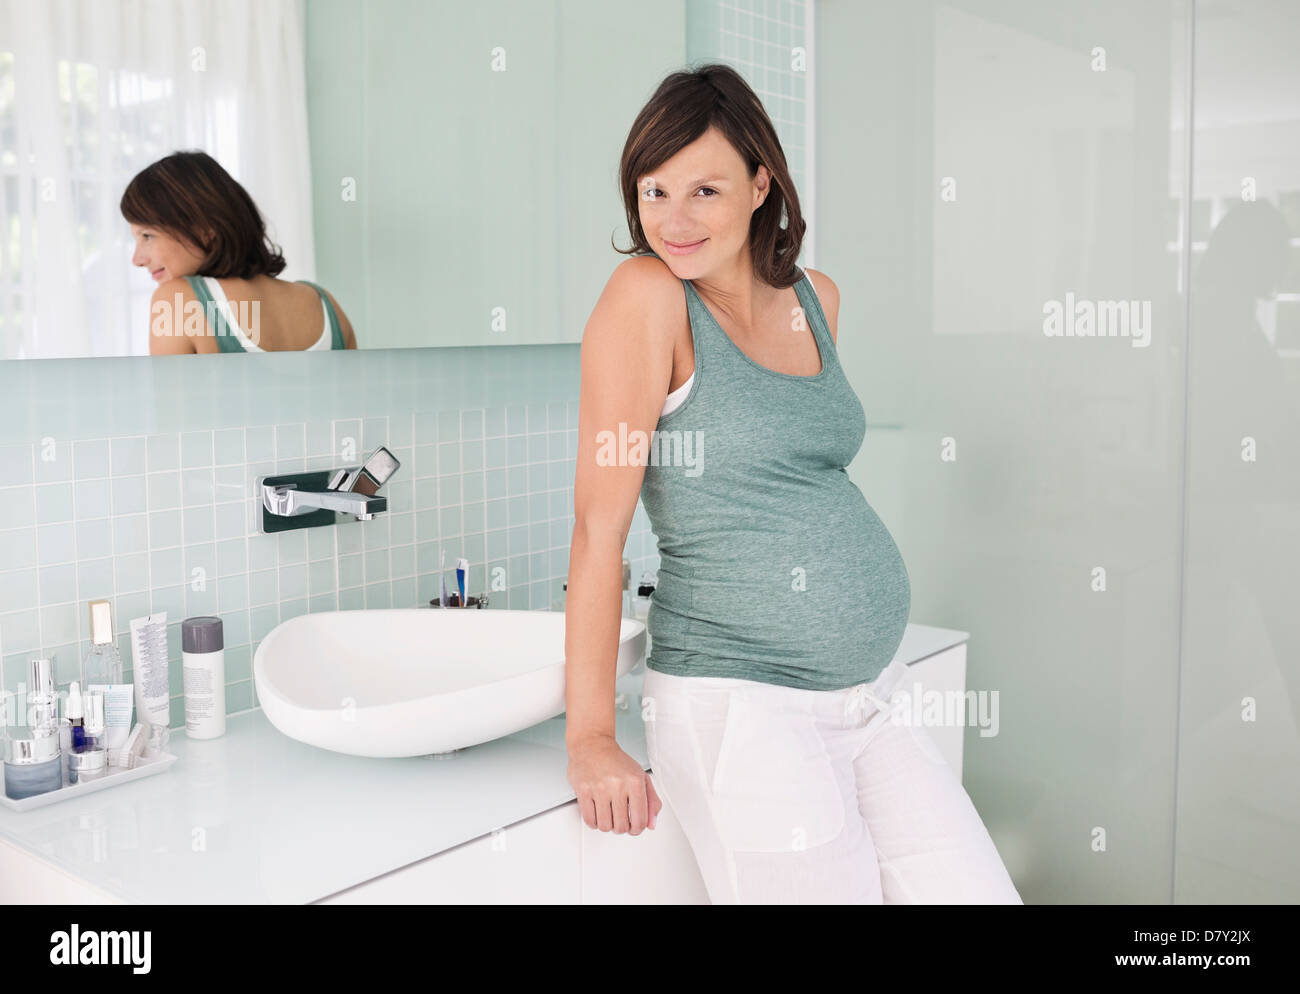 Pregnant woman leaning on bathroom sink Banque D'Images